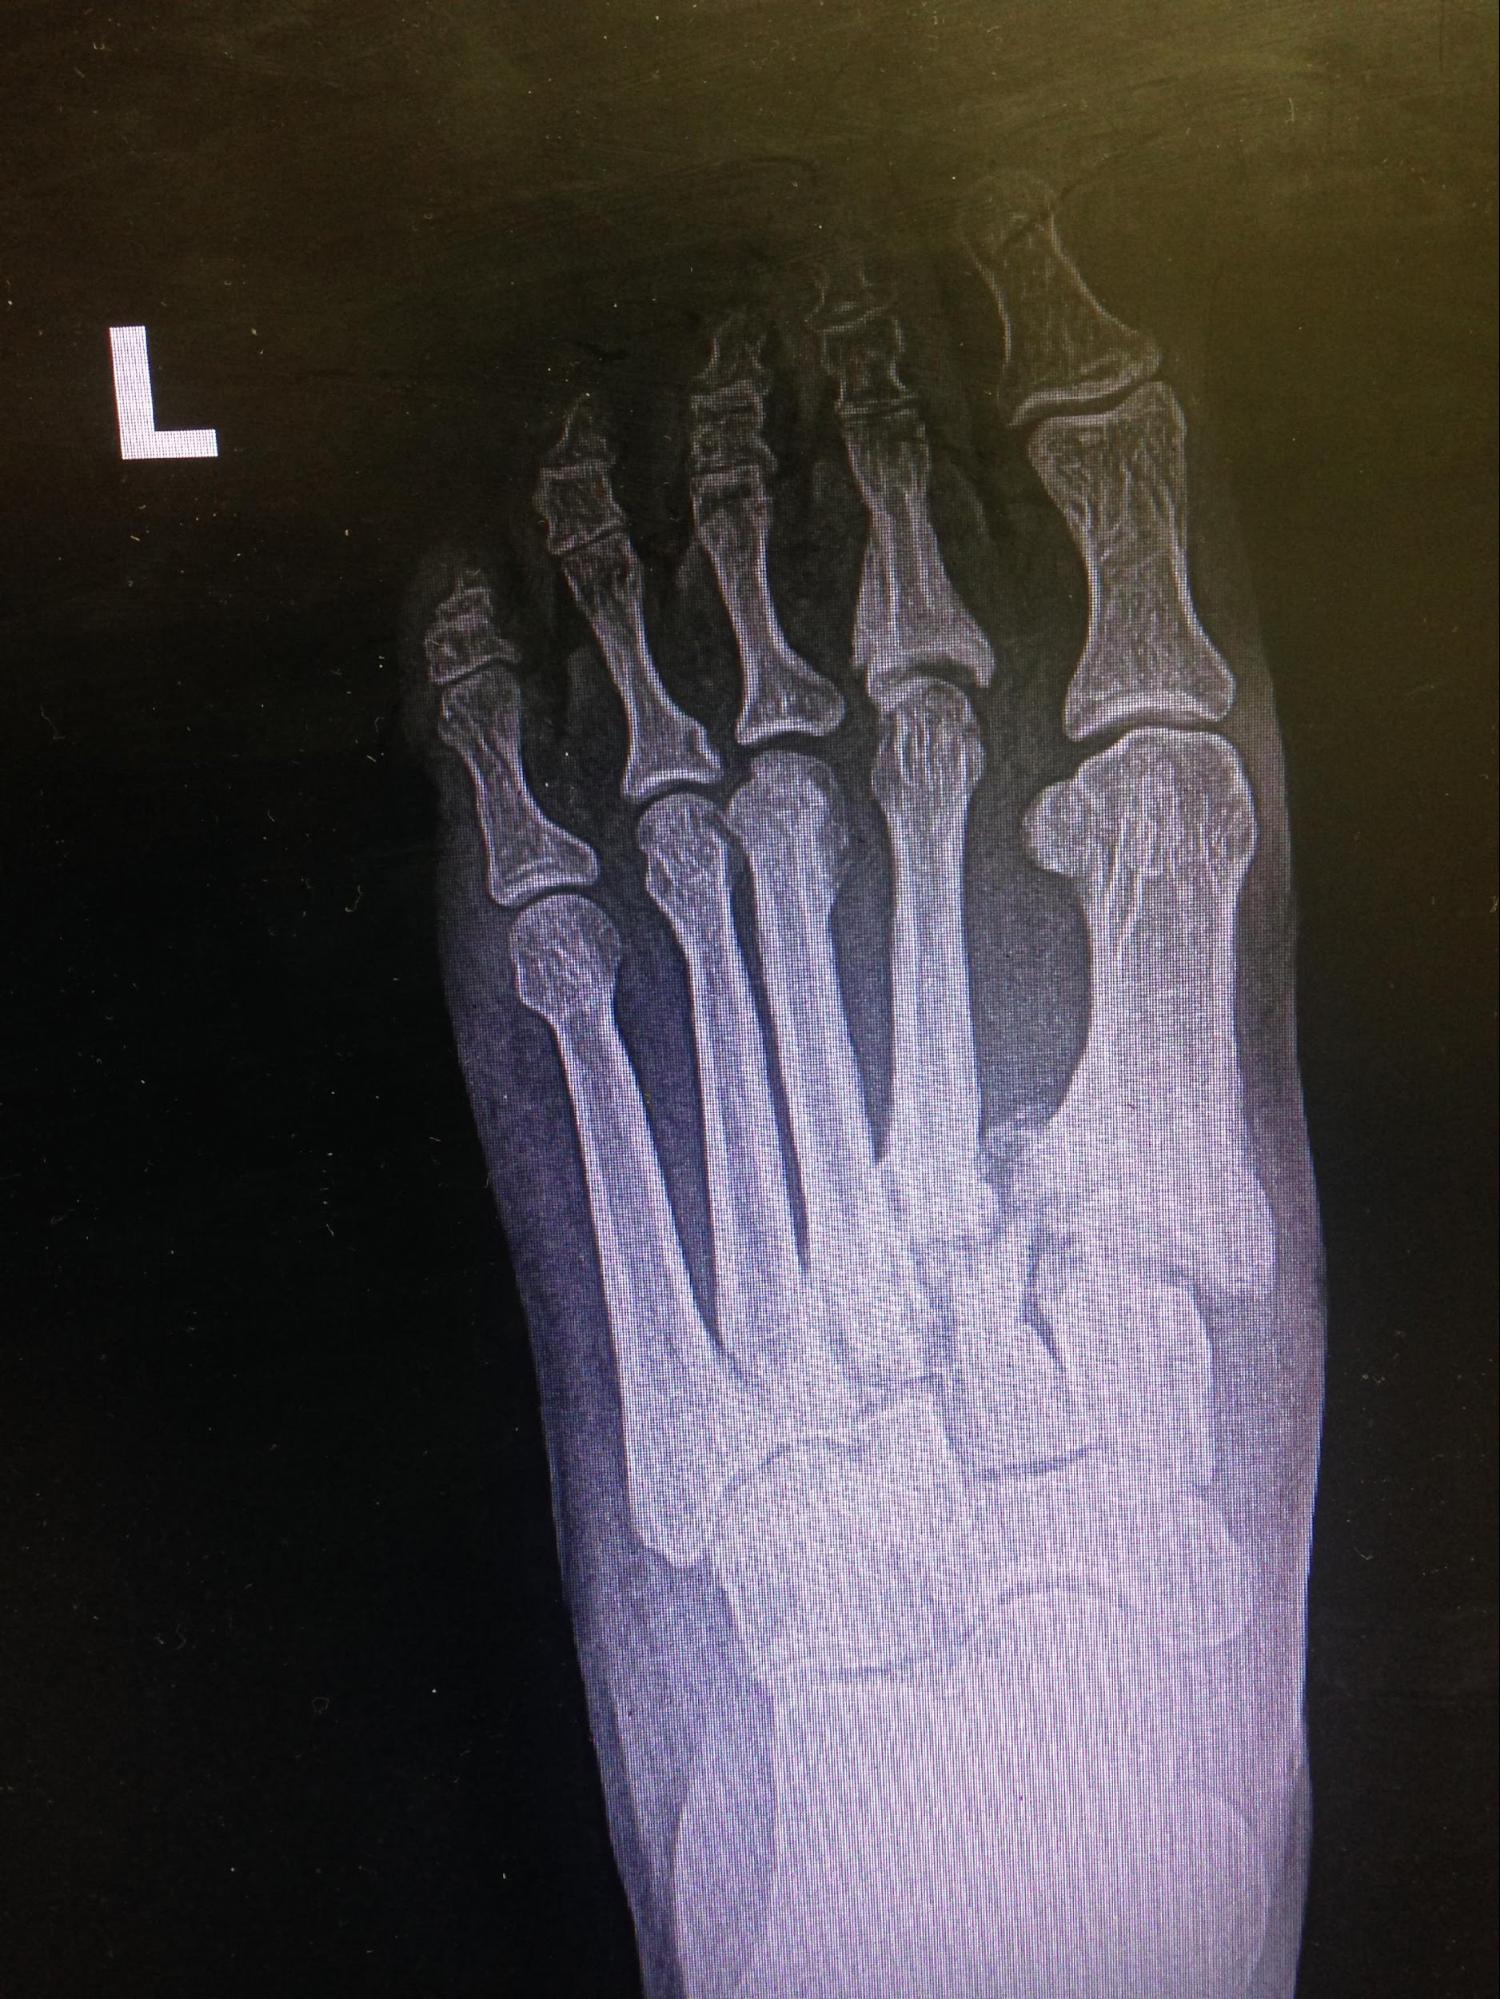 Lisfranc Dislocation
Tarsometatarsal fracture-dislocation. 
Note the communication and dislocation at the tarsometatarsal joints. 